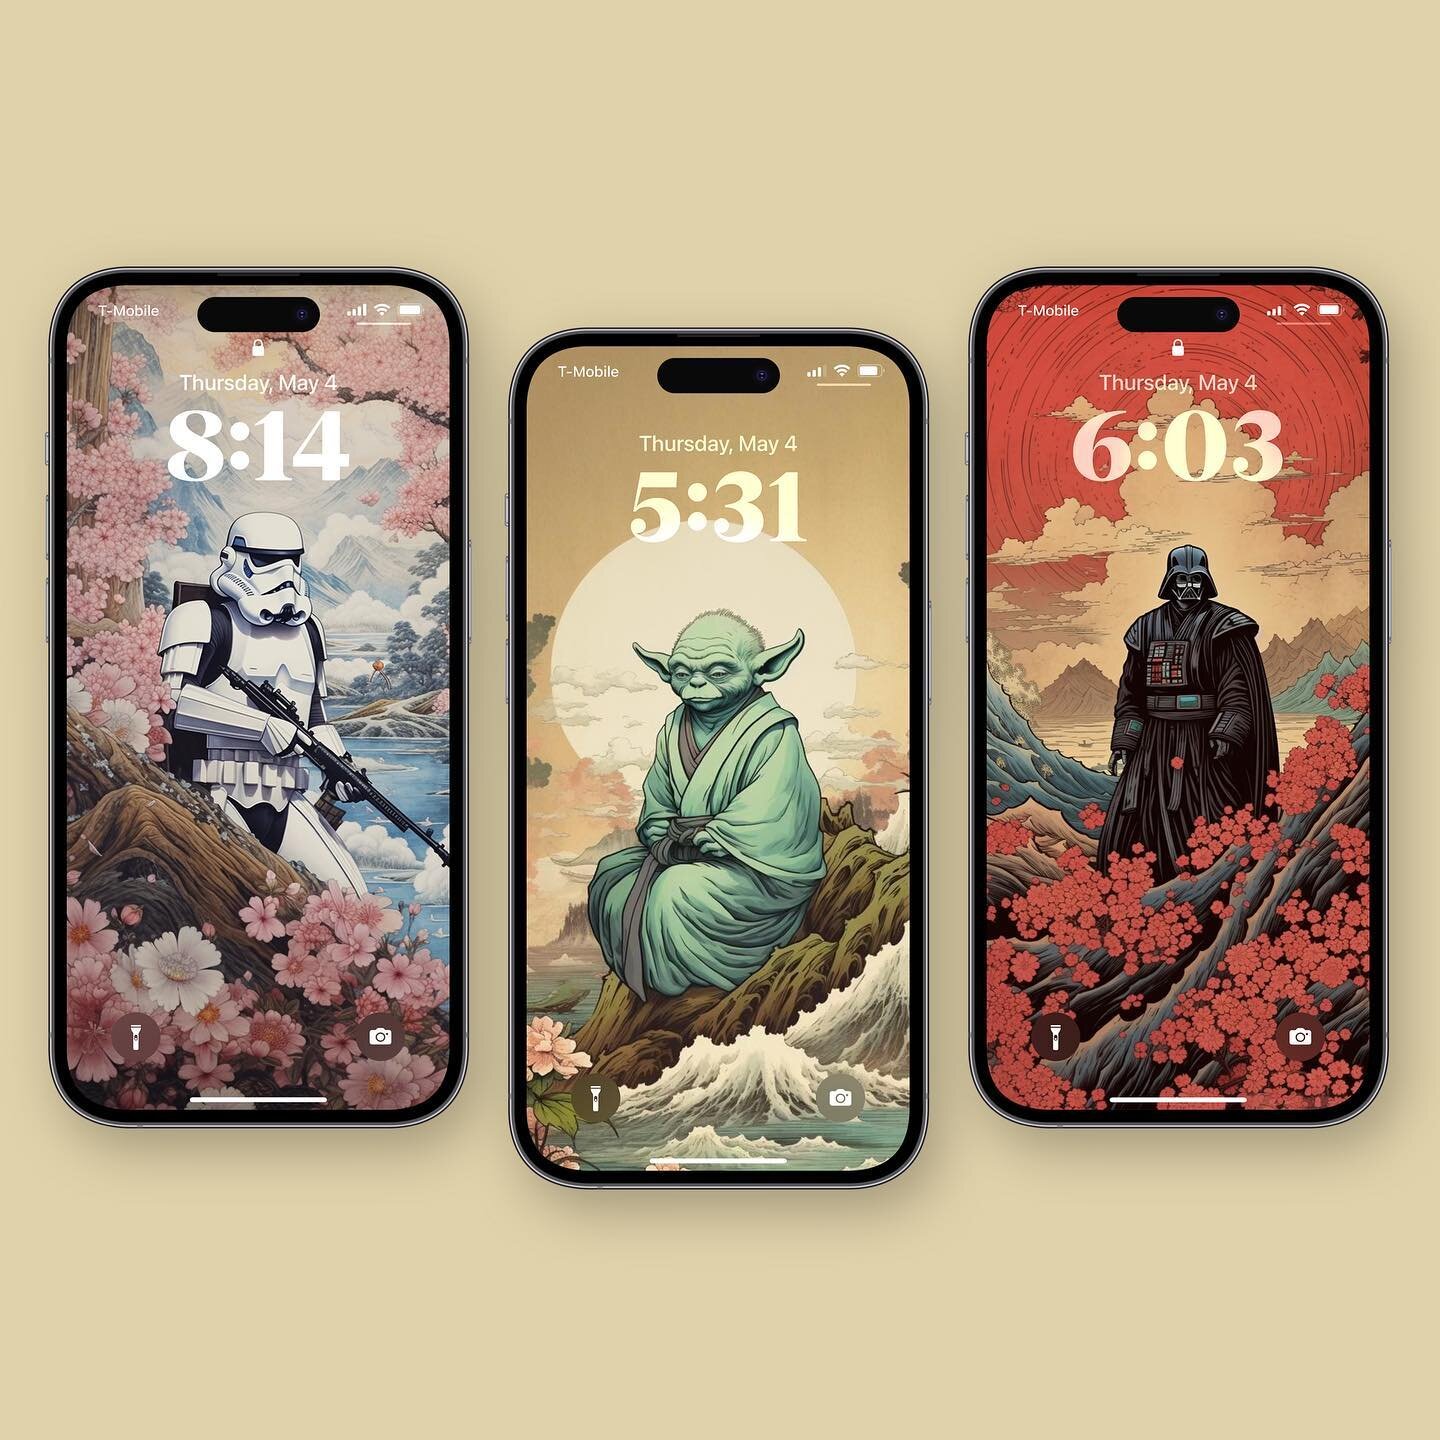 Happy #StarWarsDay everyone! To celebrate, I created 3 Star Wars inspired Japanese art-style wallpapers using #MidJourney. May the 4th be with you! 

#maythe4thbewithyou #design #art #artwork #hokusai #japanese #midjourney #aiart #iphone #phonewallpa